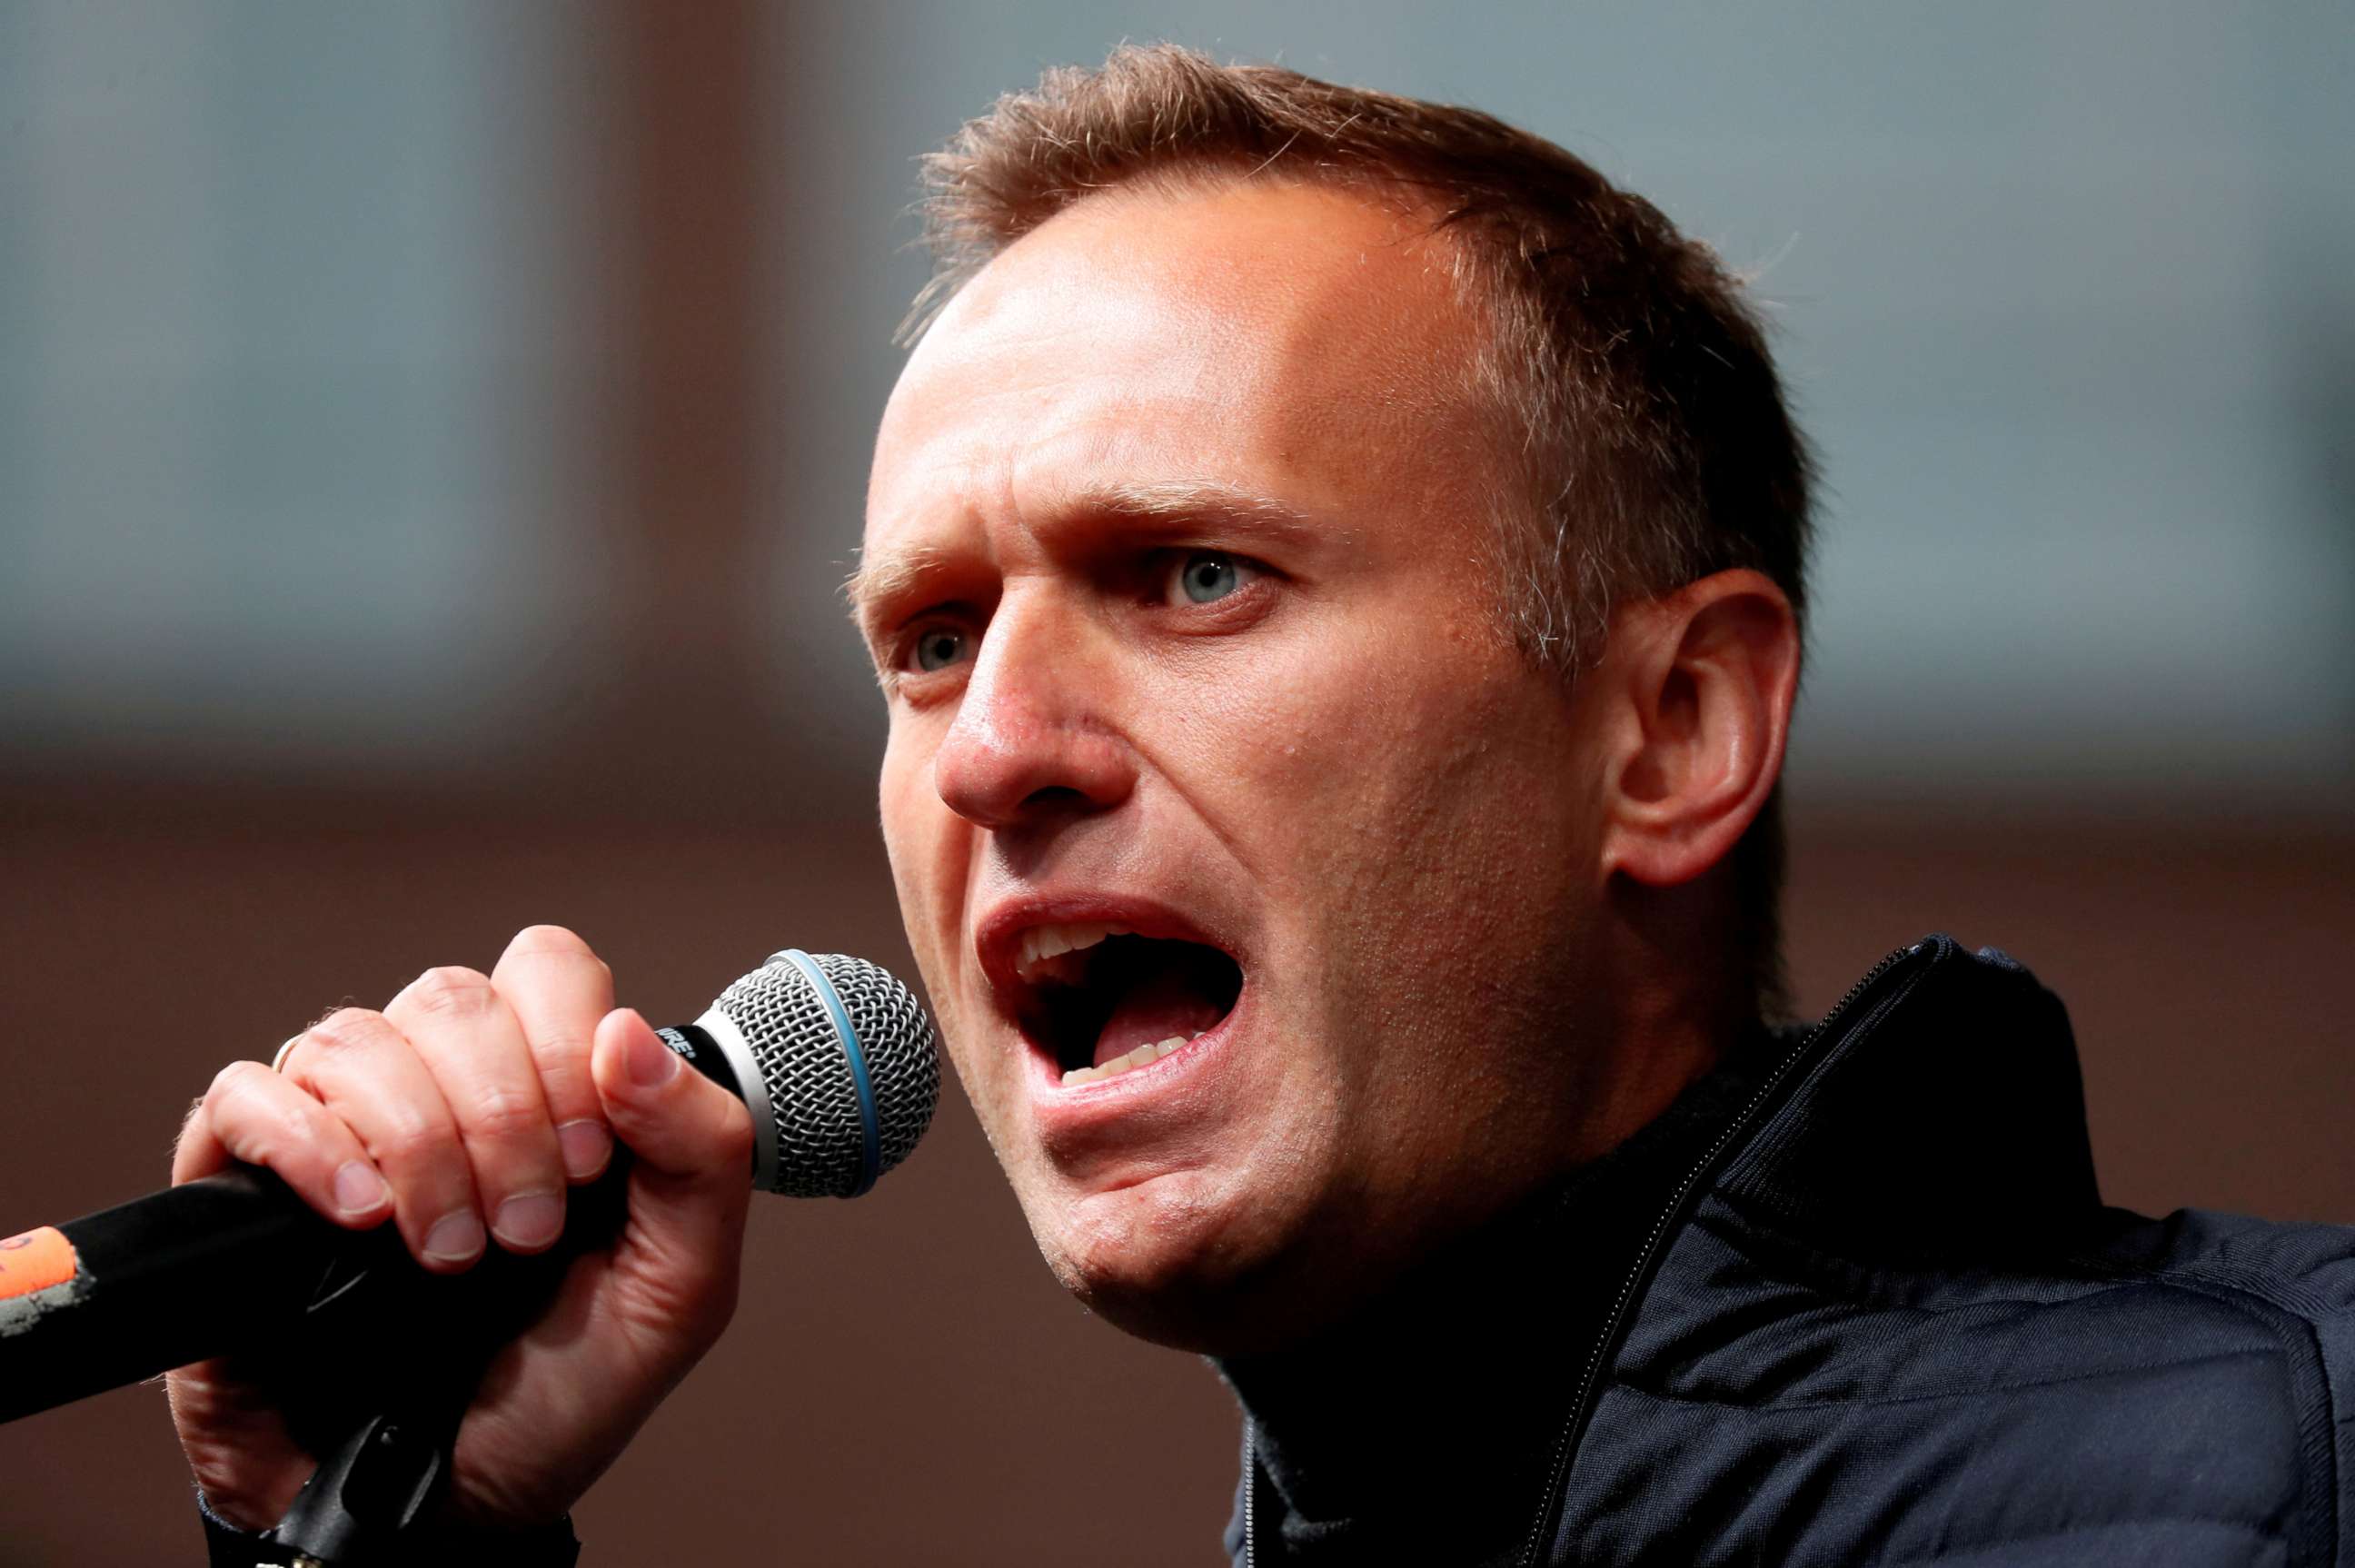 FILE PHOTO: Russian opposition leader Alexei Navalny delivers a speech during a rally to demand the release of jailed protesters, who were detained during opposition demonstrations for fair elections, in Moscow on Sept. 29, 2019.